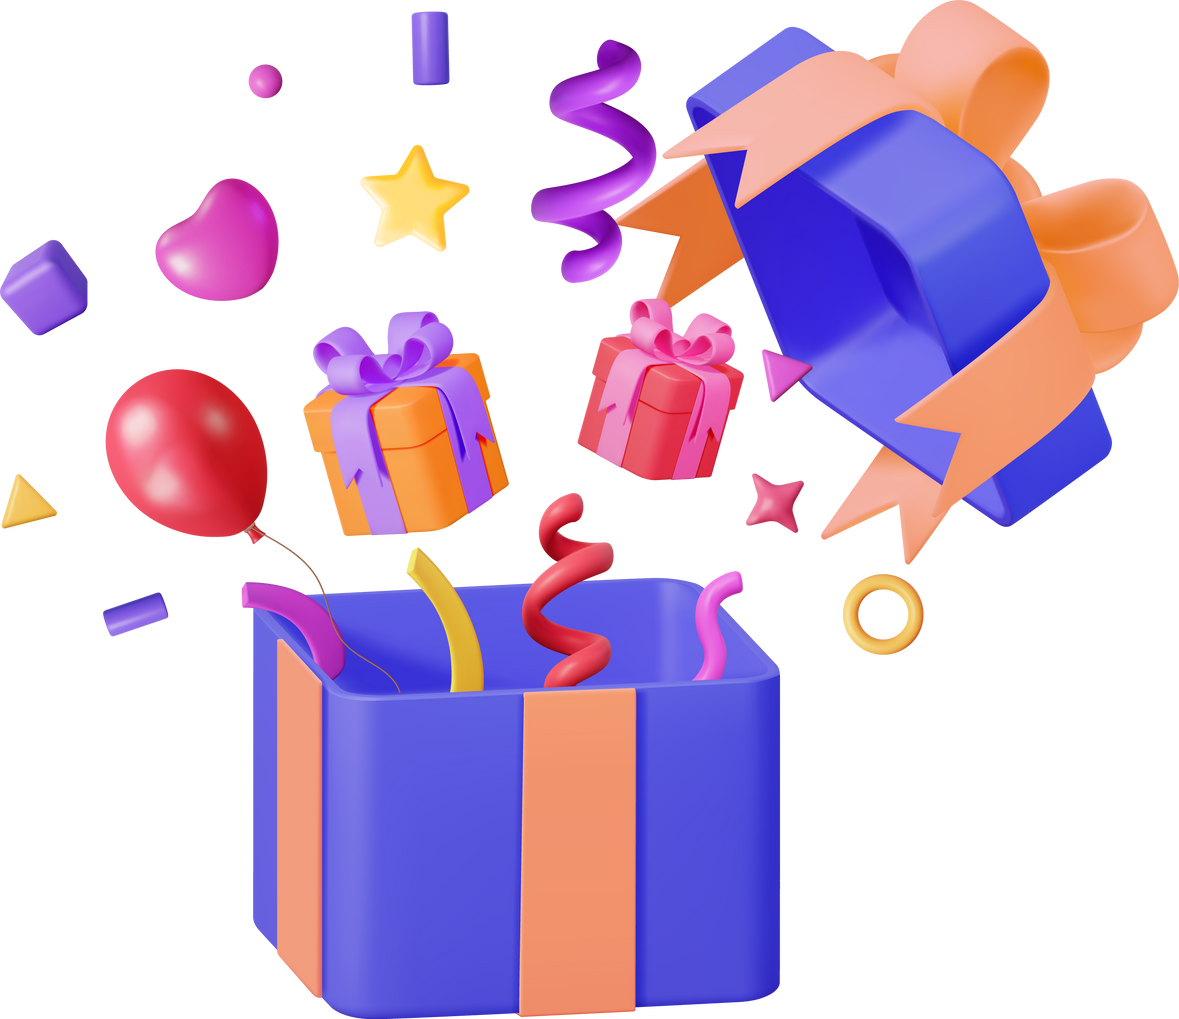 3D Open Gift Box With Falling Confetti